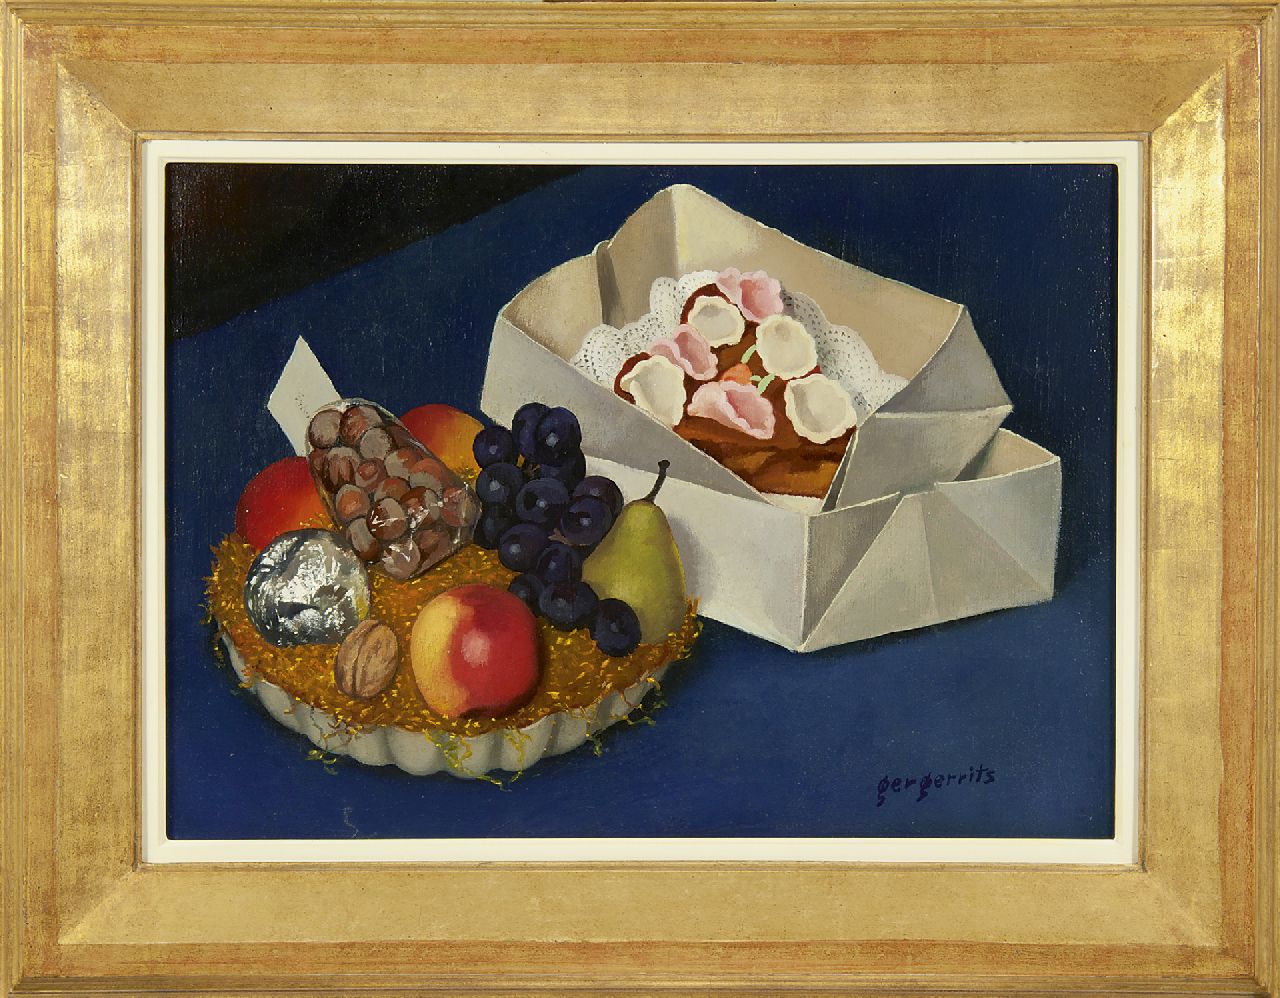 Gerrits G.J.  | Gerrit Jacobus 'Ger' Gerrits | Paintings offered for sale | Still life with a fruit basket and cake, oil on canvas 36.2 x 50.2 cm, signed l.r. and painted in May 1944